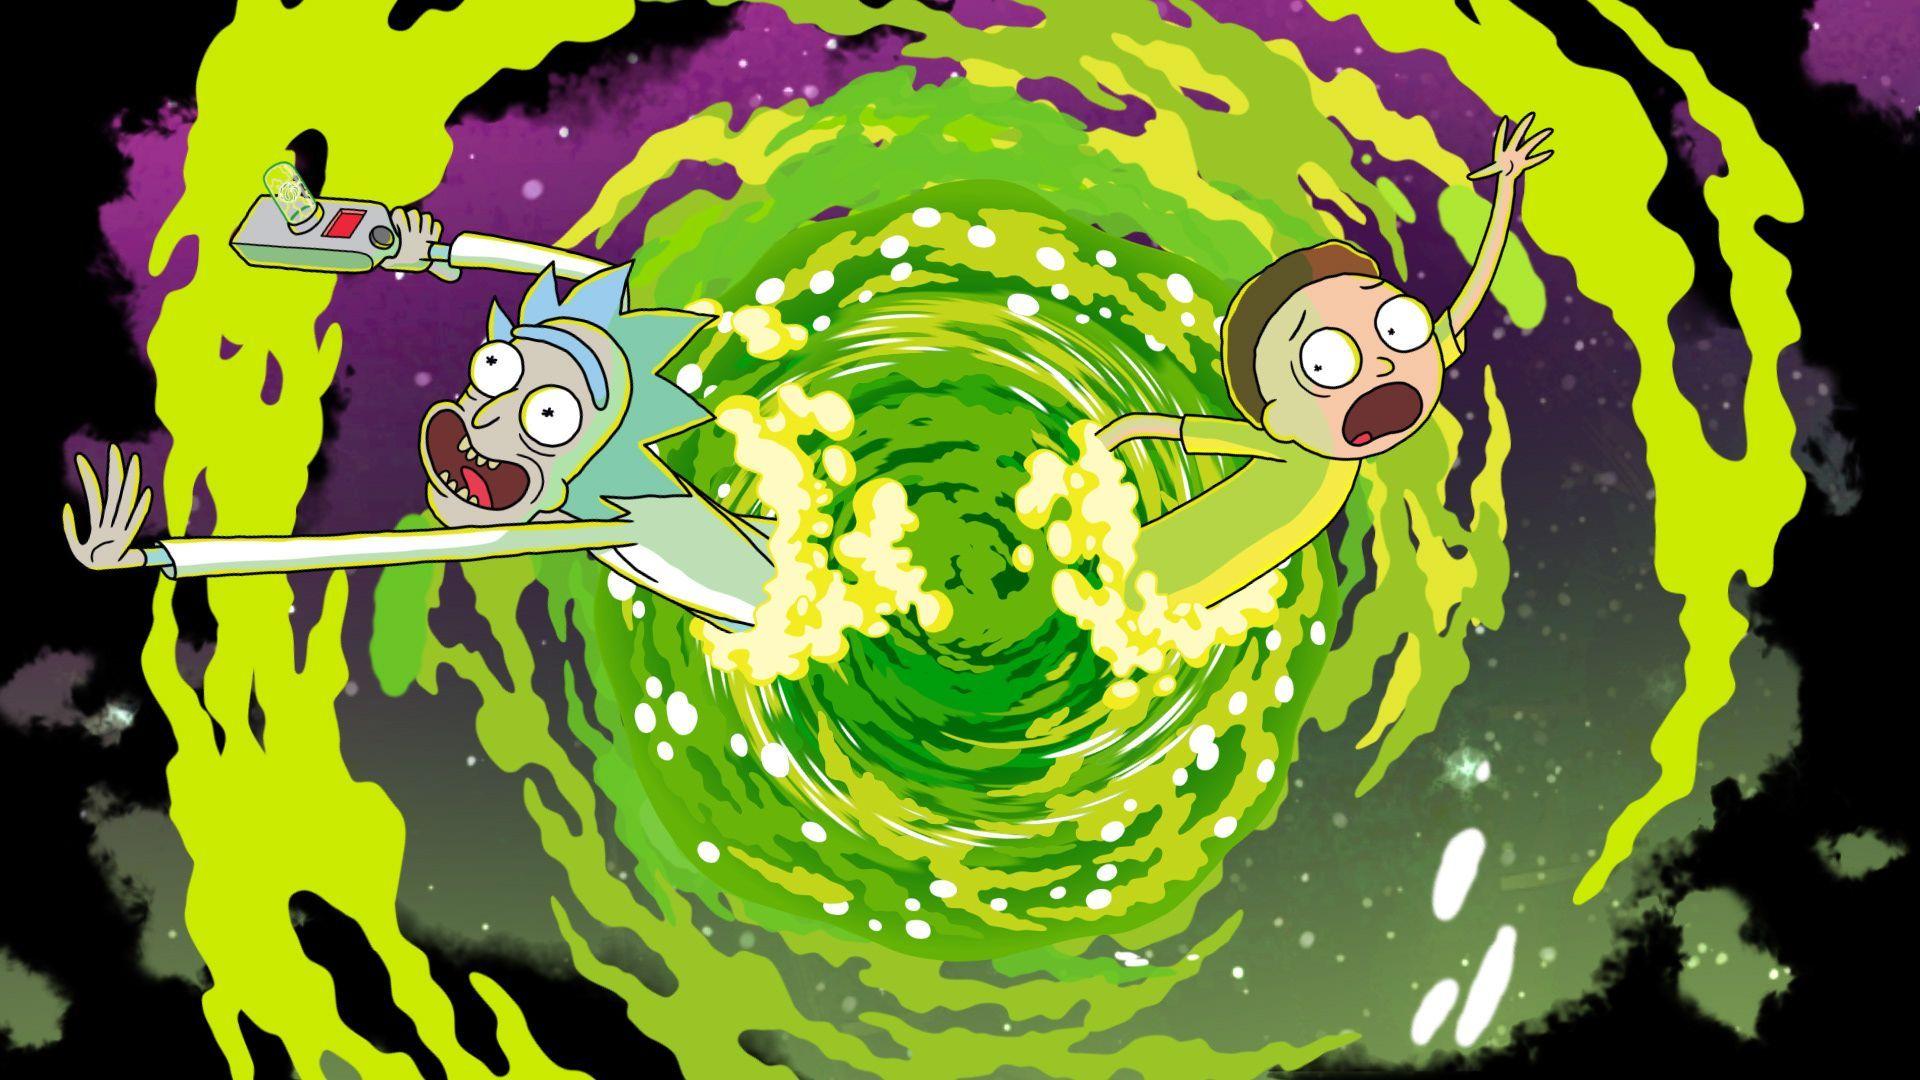 Rick and Morty scaping portal Wallpaper 4k HD ID:9235